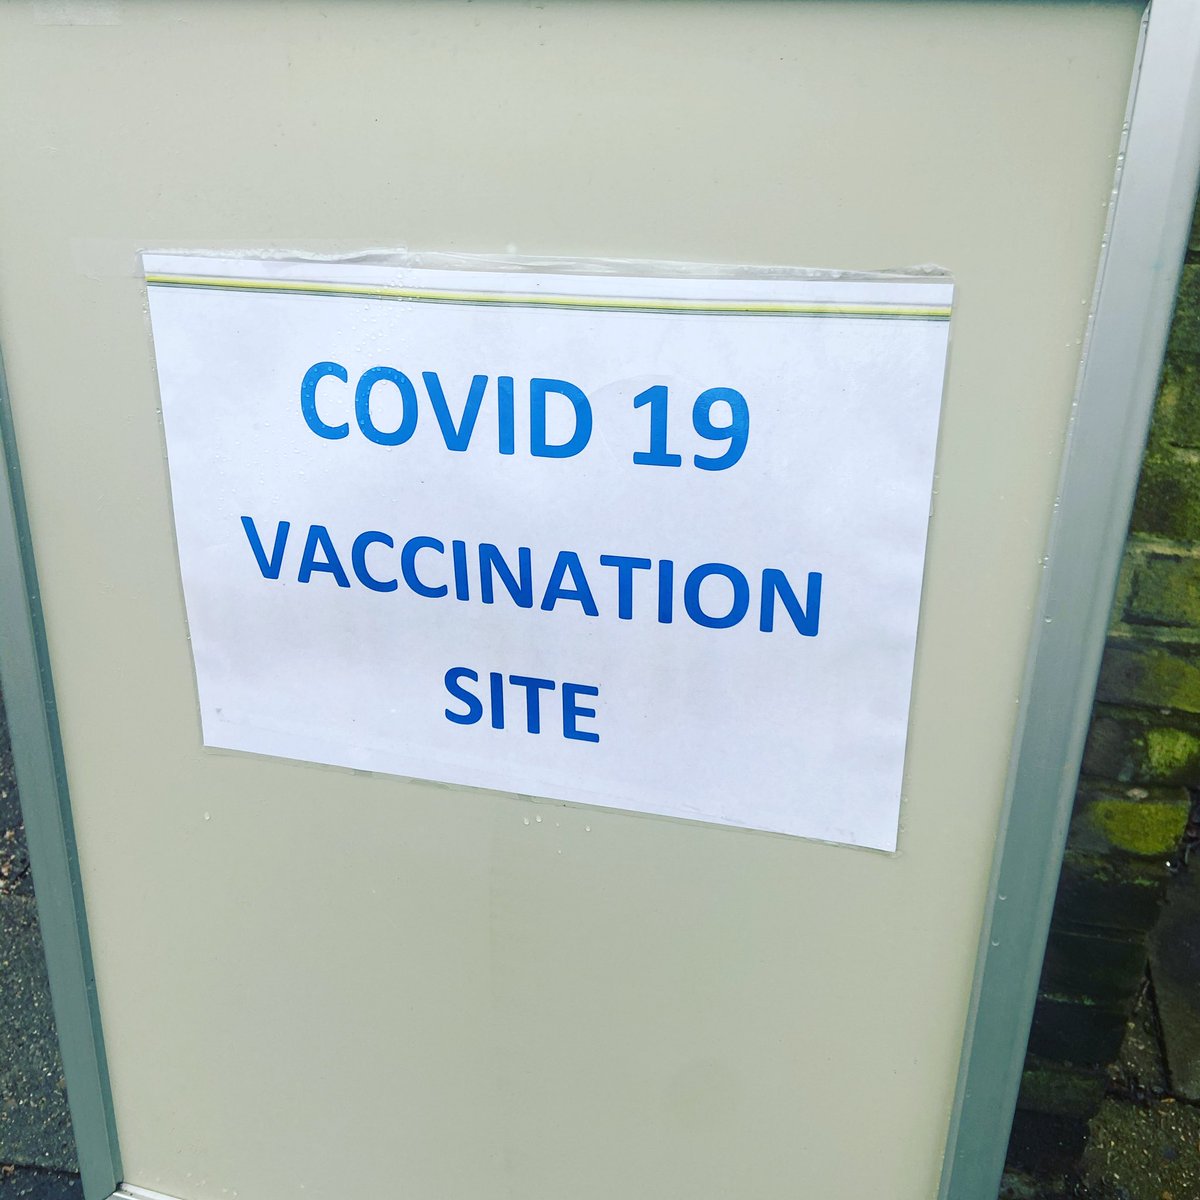 A snowy north London on Sunday afternoon and there was no happier place to be. I joined a small army of around 50 people to help get nearly 2000 people vaccinated over the weekend.